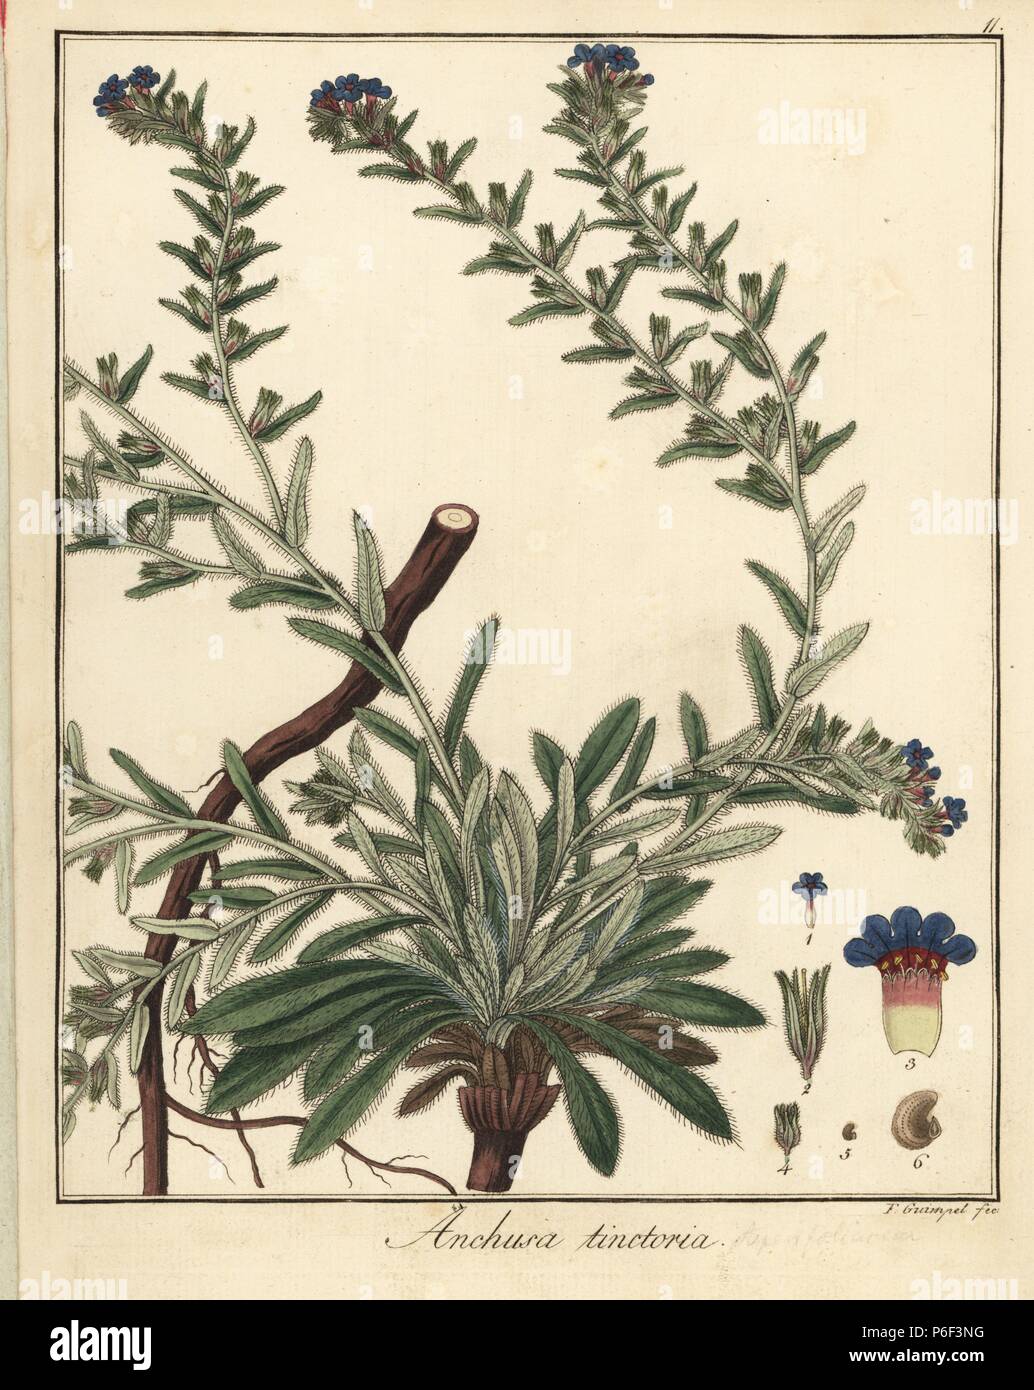 Alkanet or dyers' bugloss, Alkanna tinctoria. Handcoloured copperplate engraving by F. Guimpel from Dr. Friedrich Gottlob Hayne's Medical Botany, Berlin, 1822. Hayne (1763-1832) was a German botanist, apothecary and professor of pharmaceutical botany at Berlin University. Stock Photo